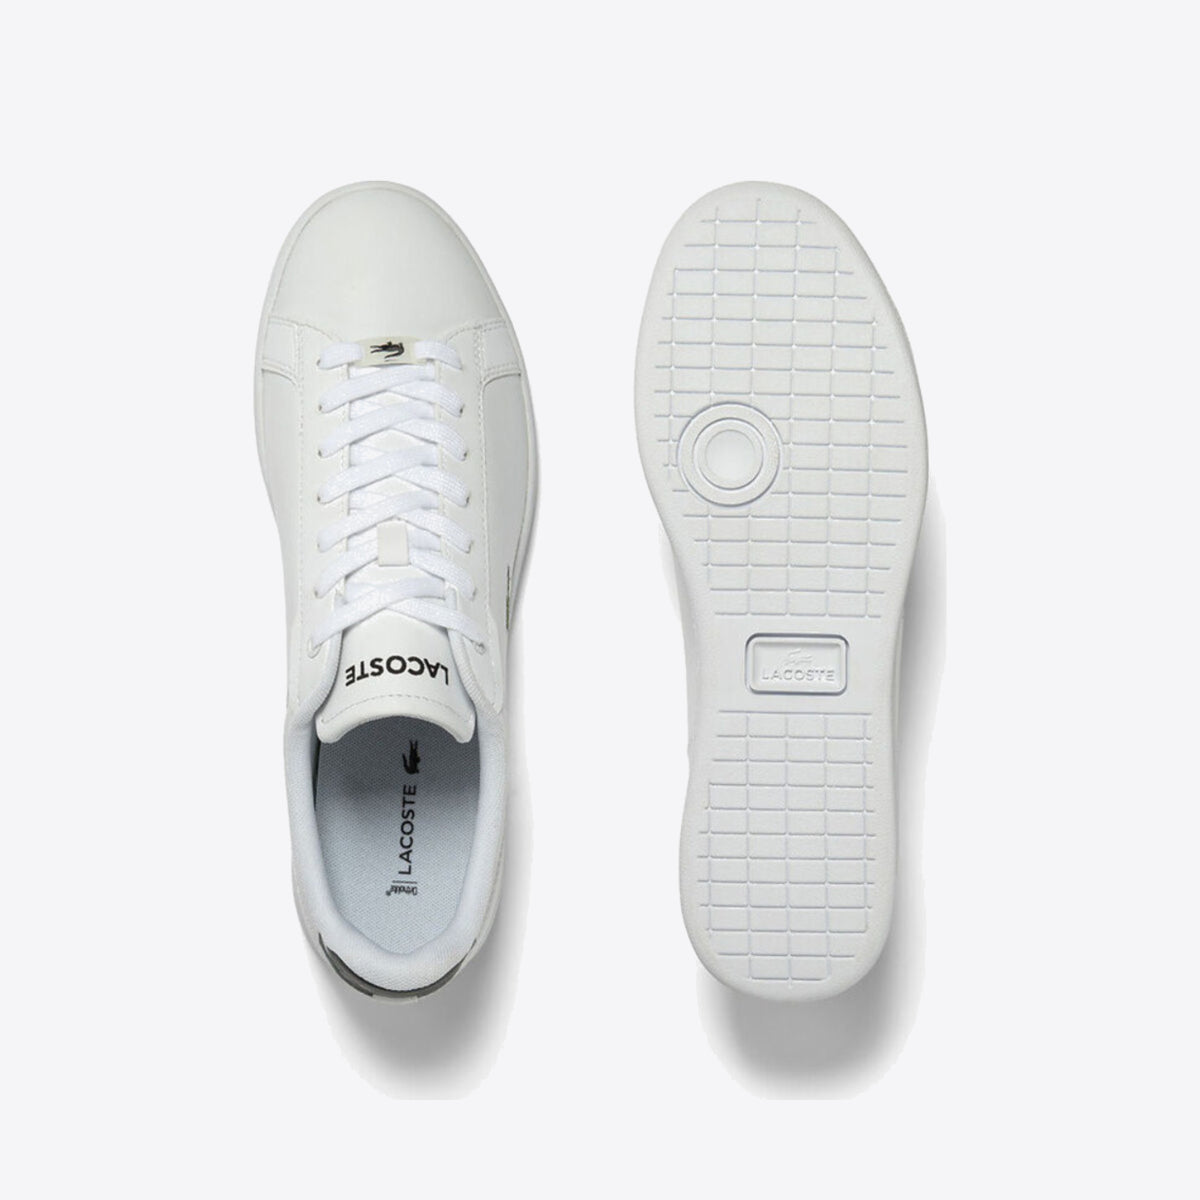 LACOSTE Carnaby Pro 123 White/Black - Image 4